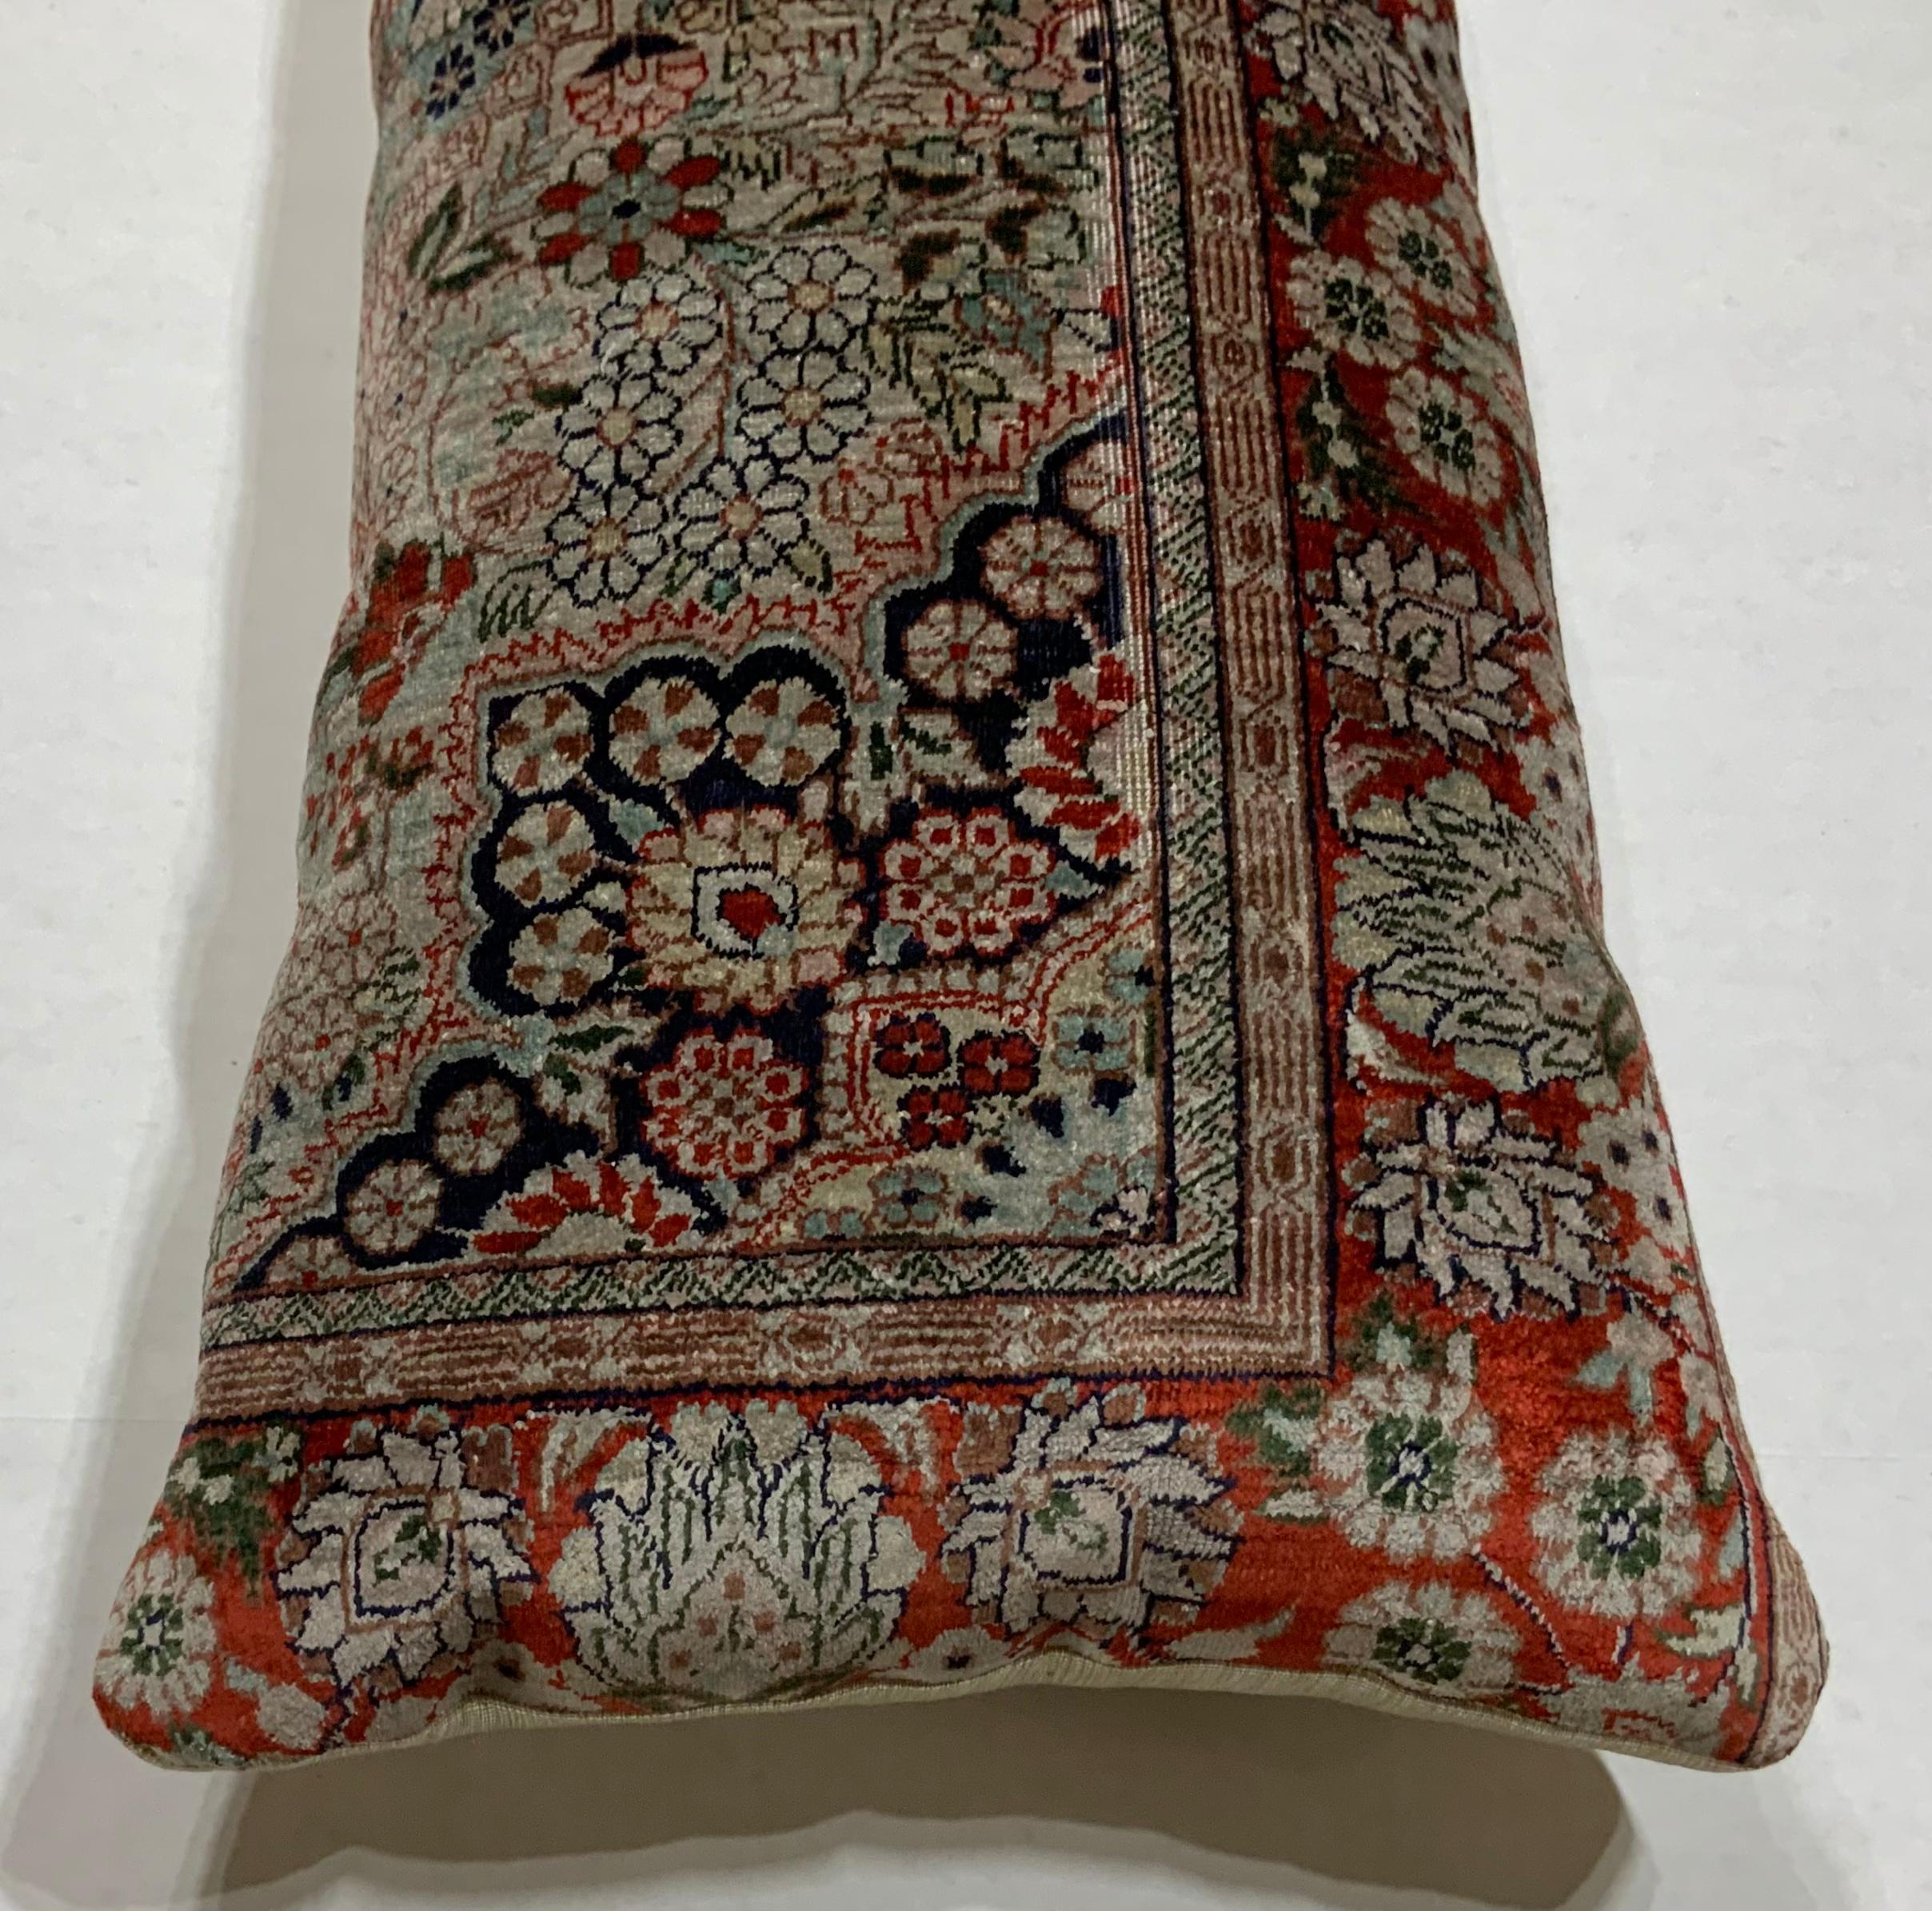 Exceptional pillow made of handwoven quality silk Chinese rug fragment, soft silk feel like velvet
Beautiful motifs of flowers and vine, double silk backing, with fresh new quality insert.